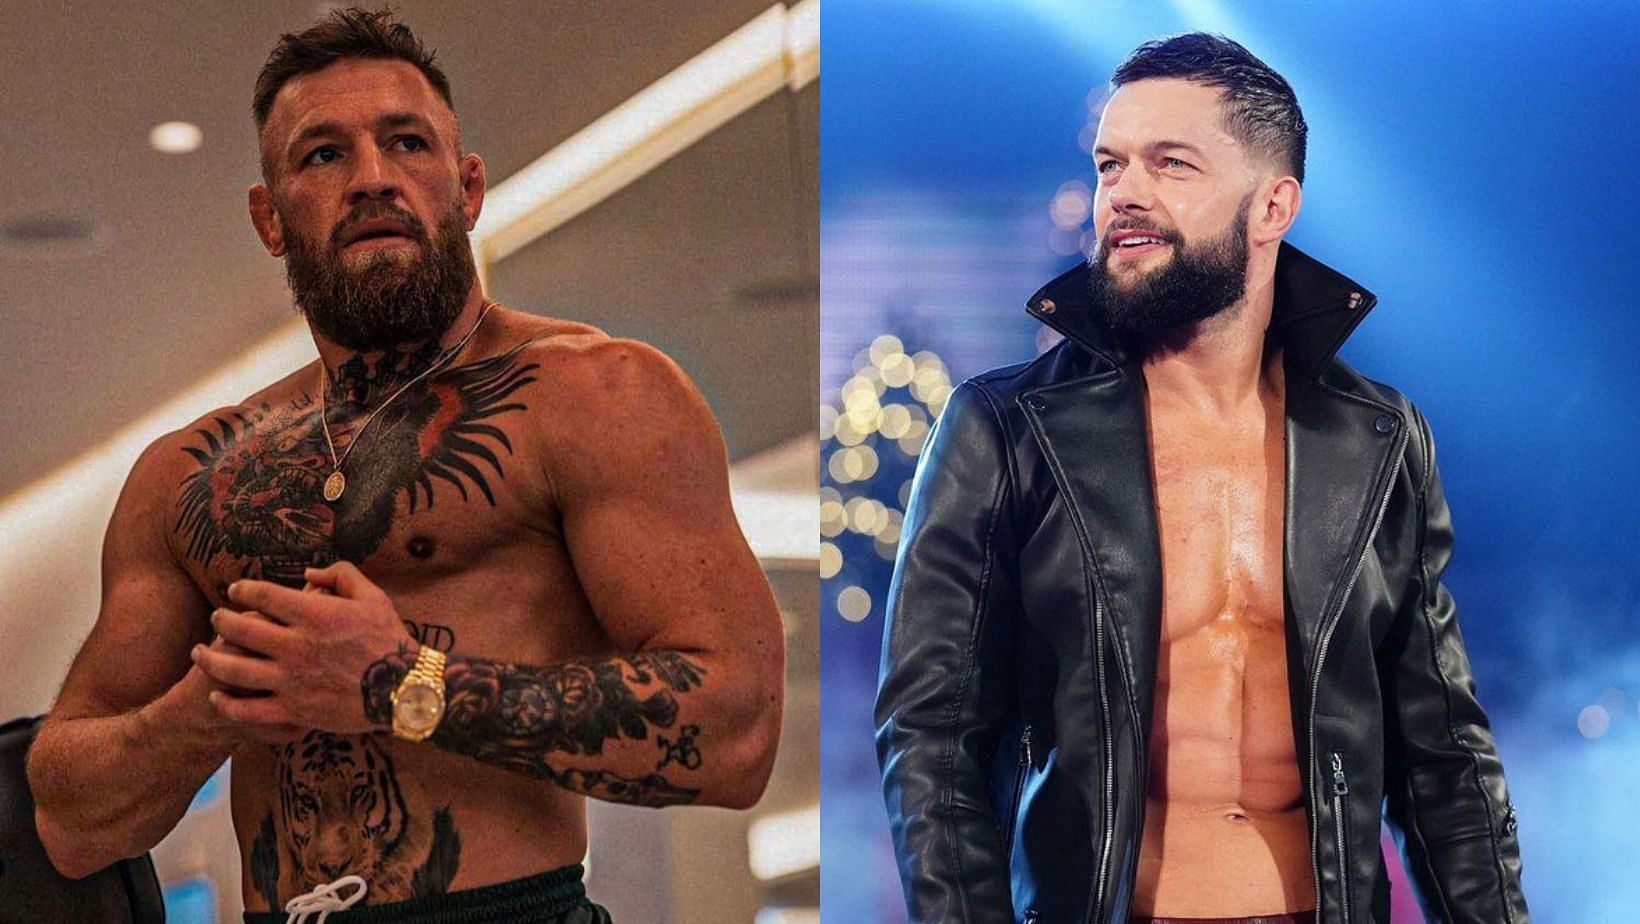 Finn Balor and Conor McGregor support injured Irish MMA fighter